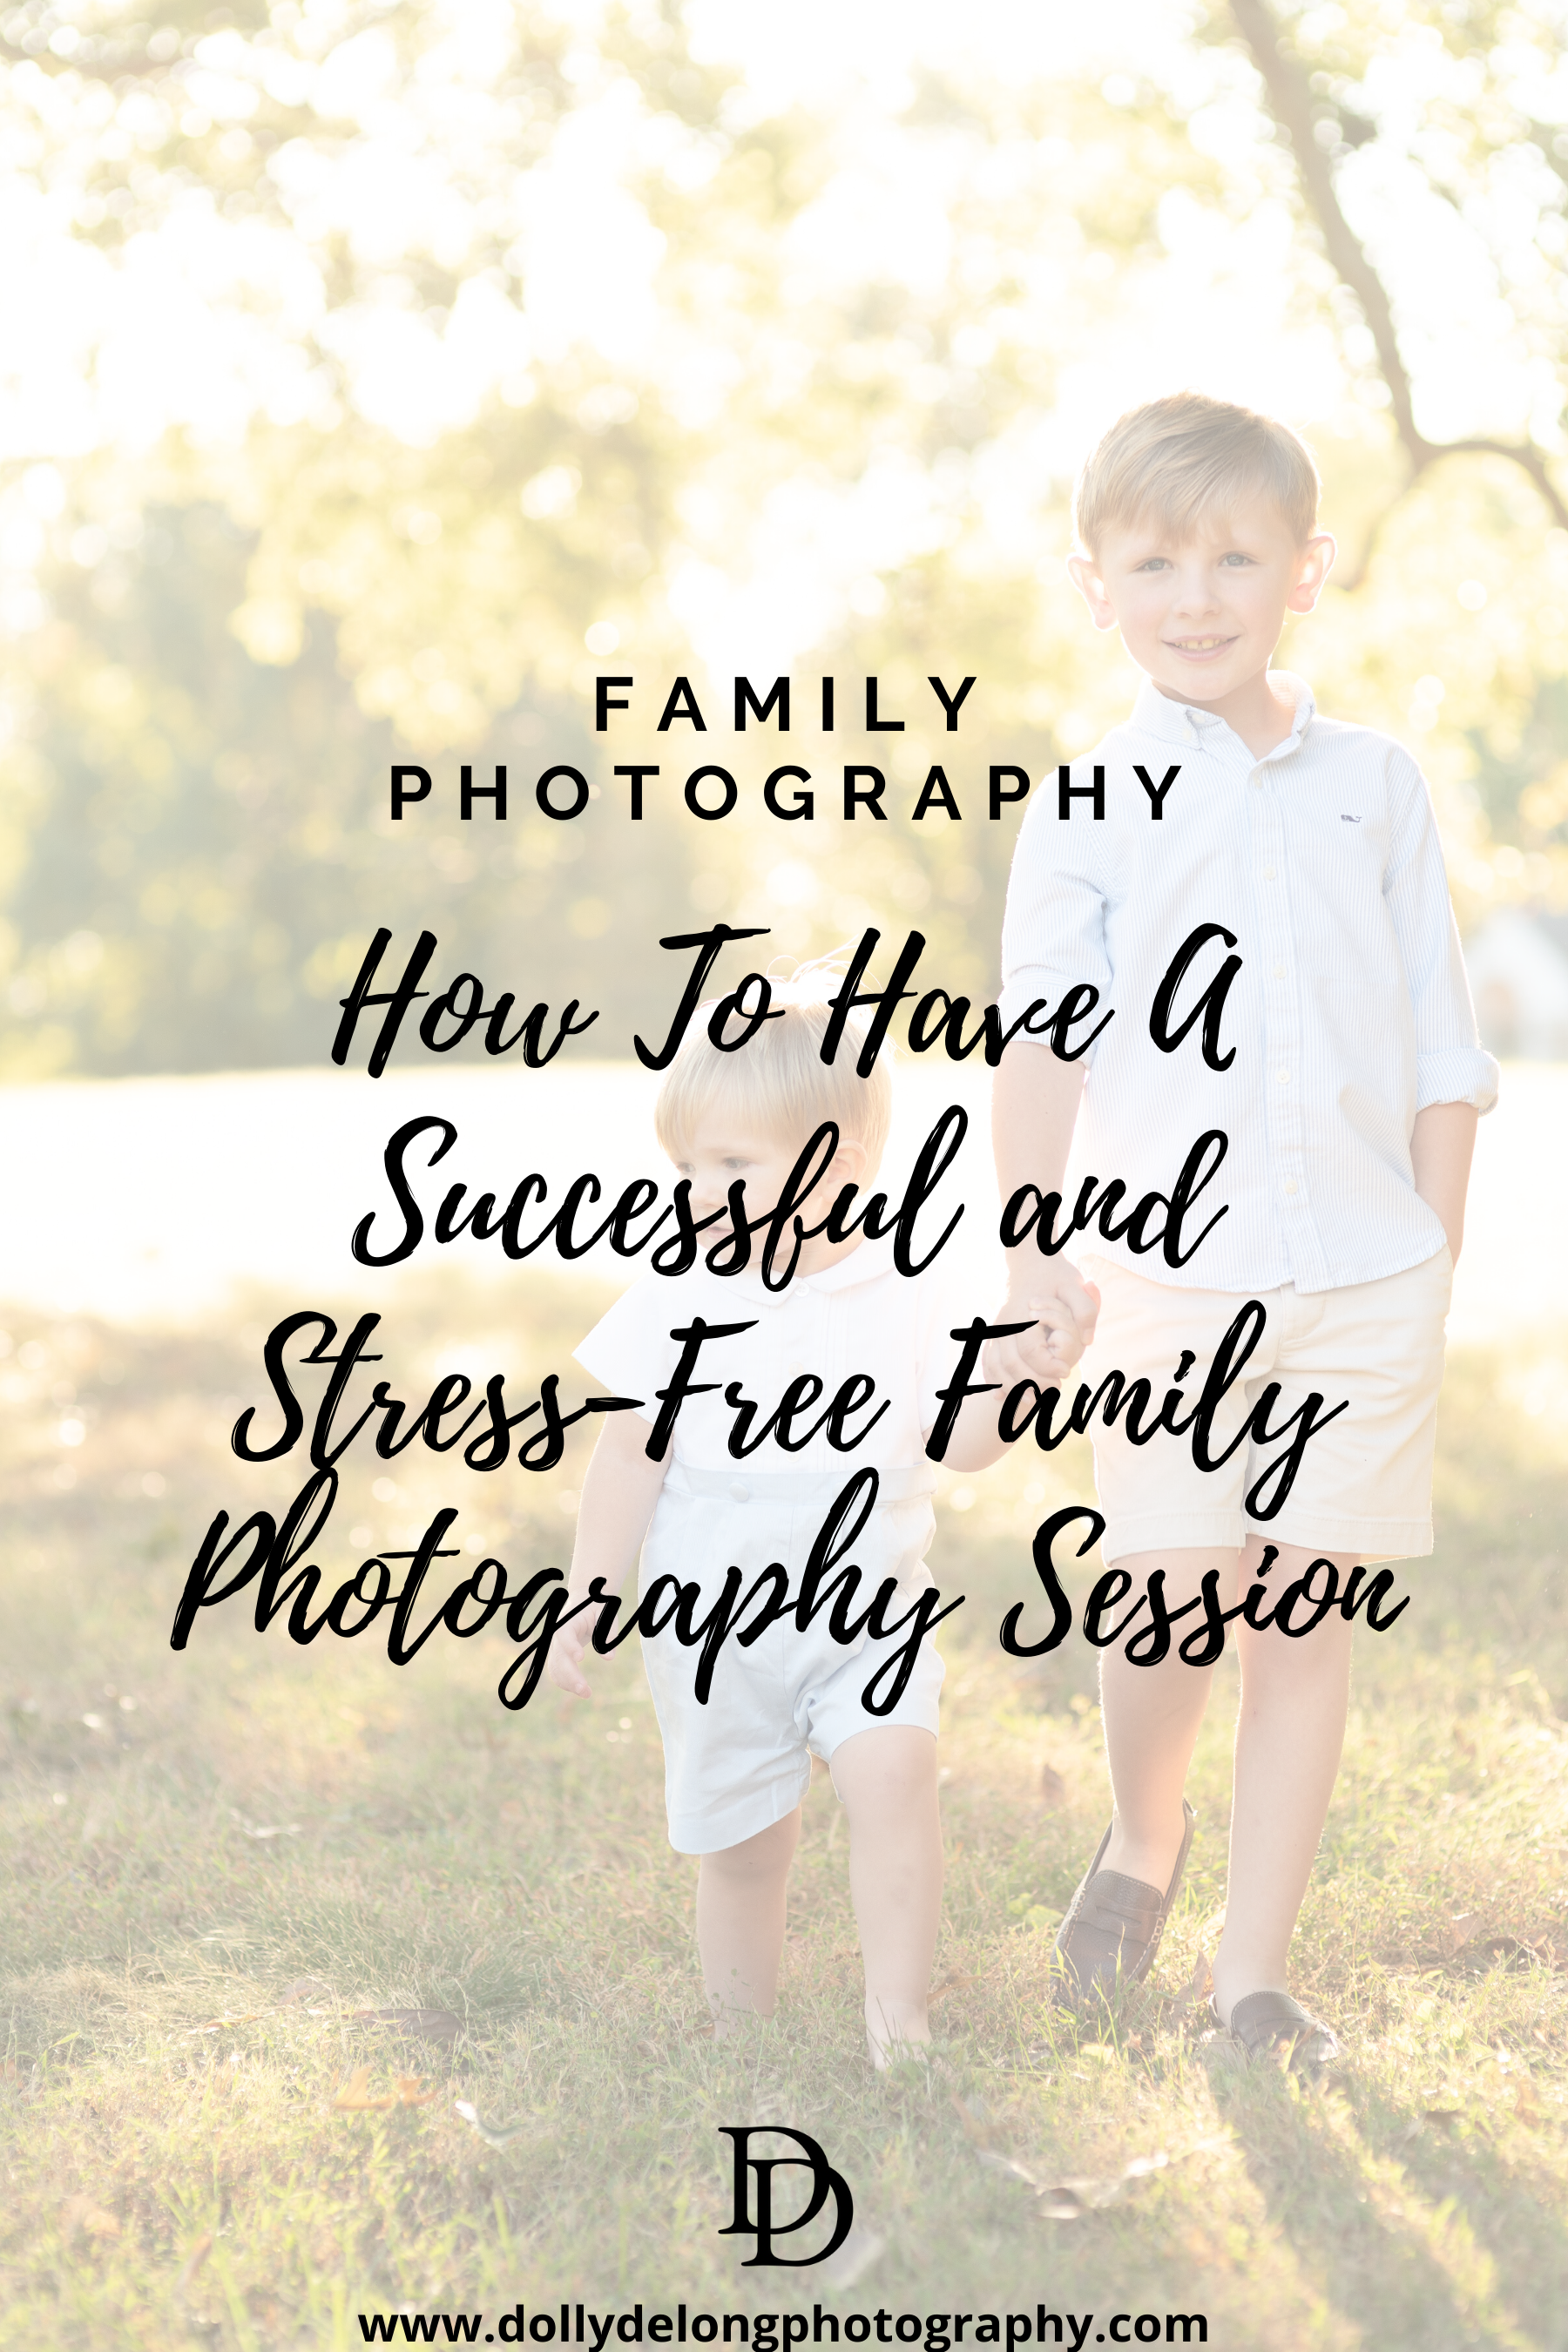 How To Have A Successful and Stress-Free Family Photography Session 